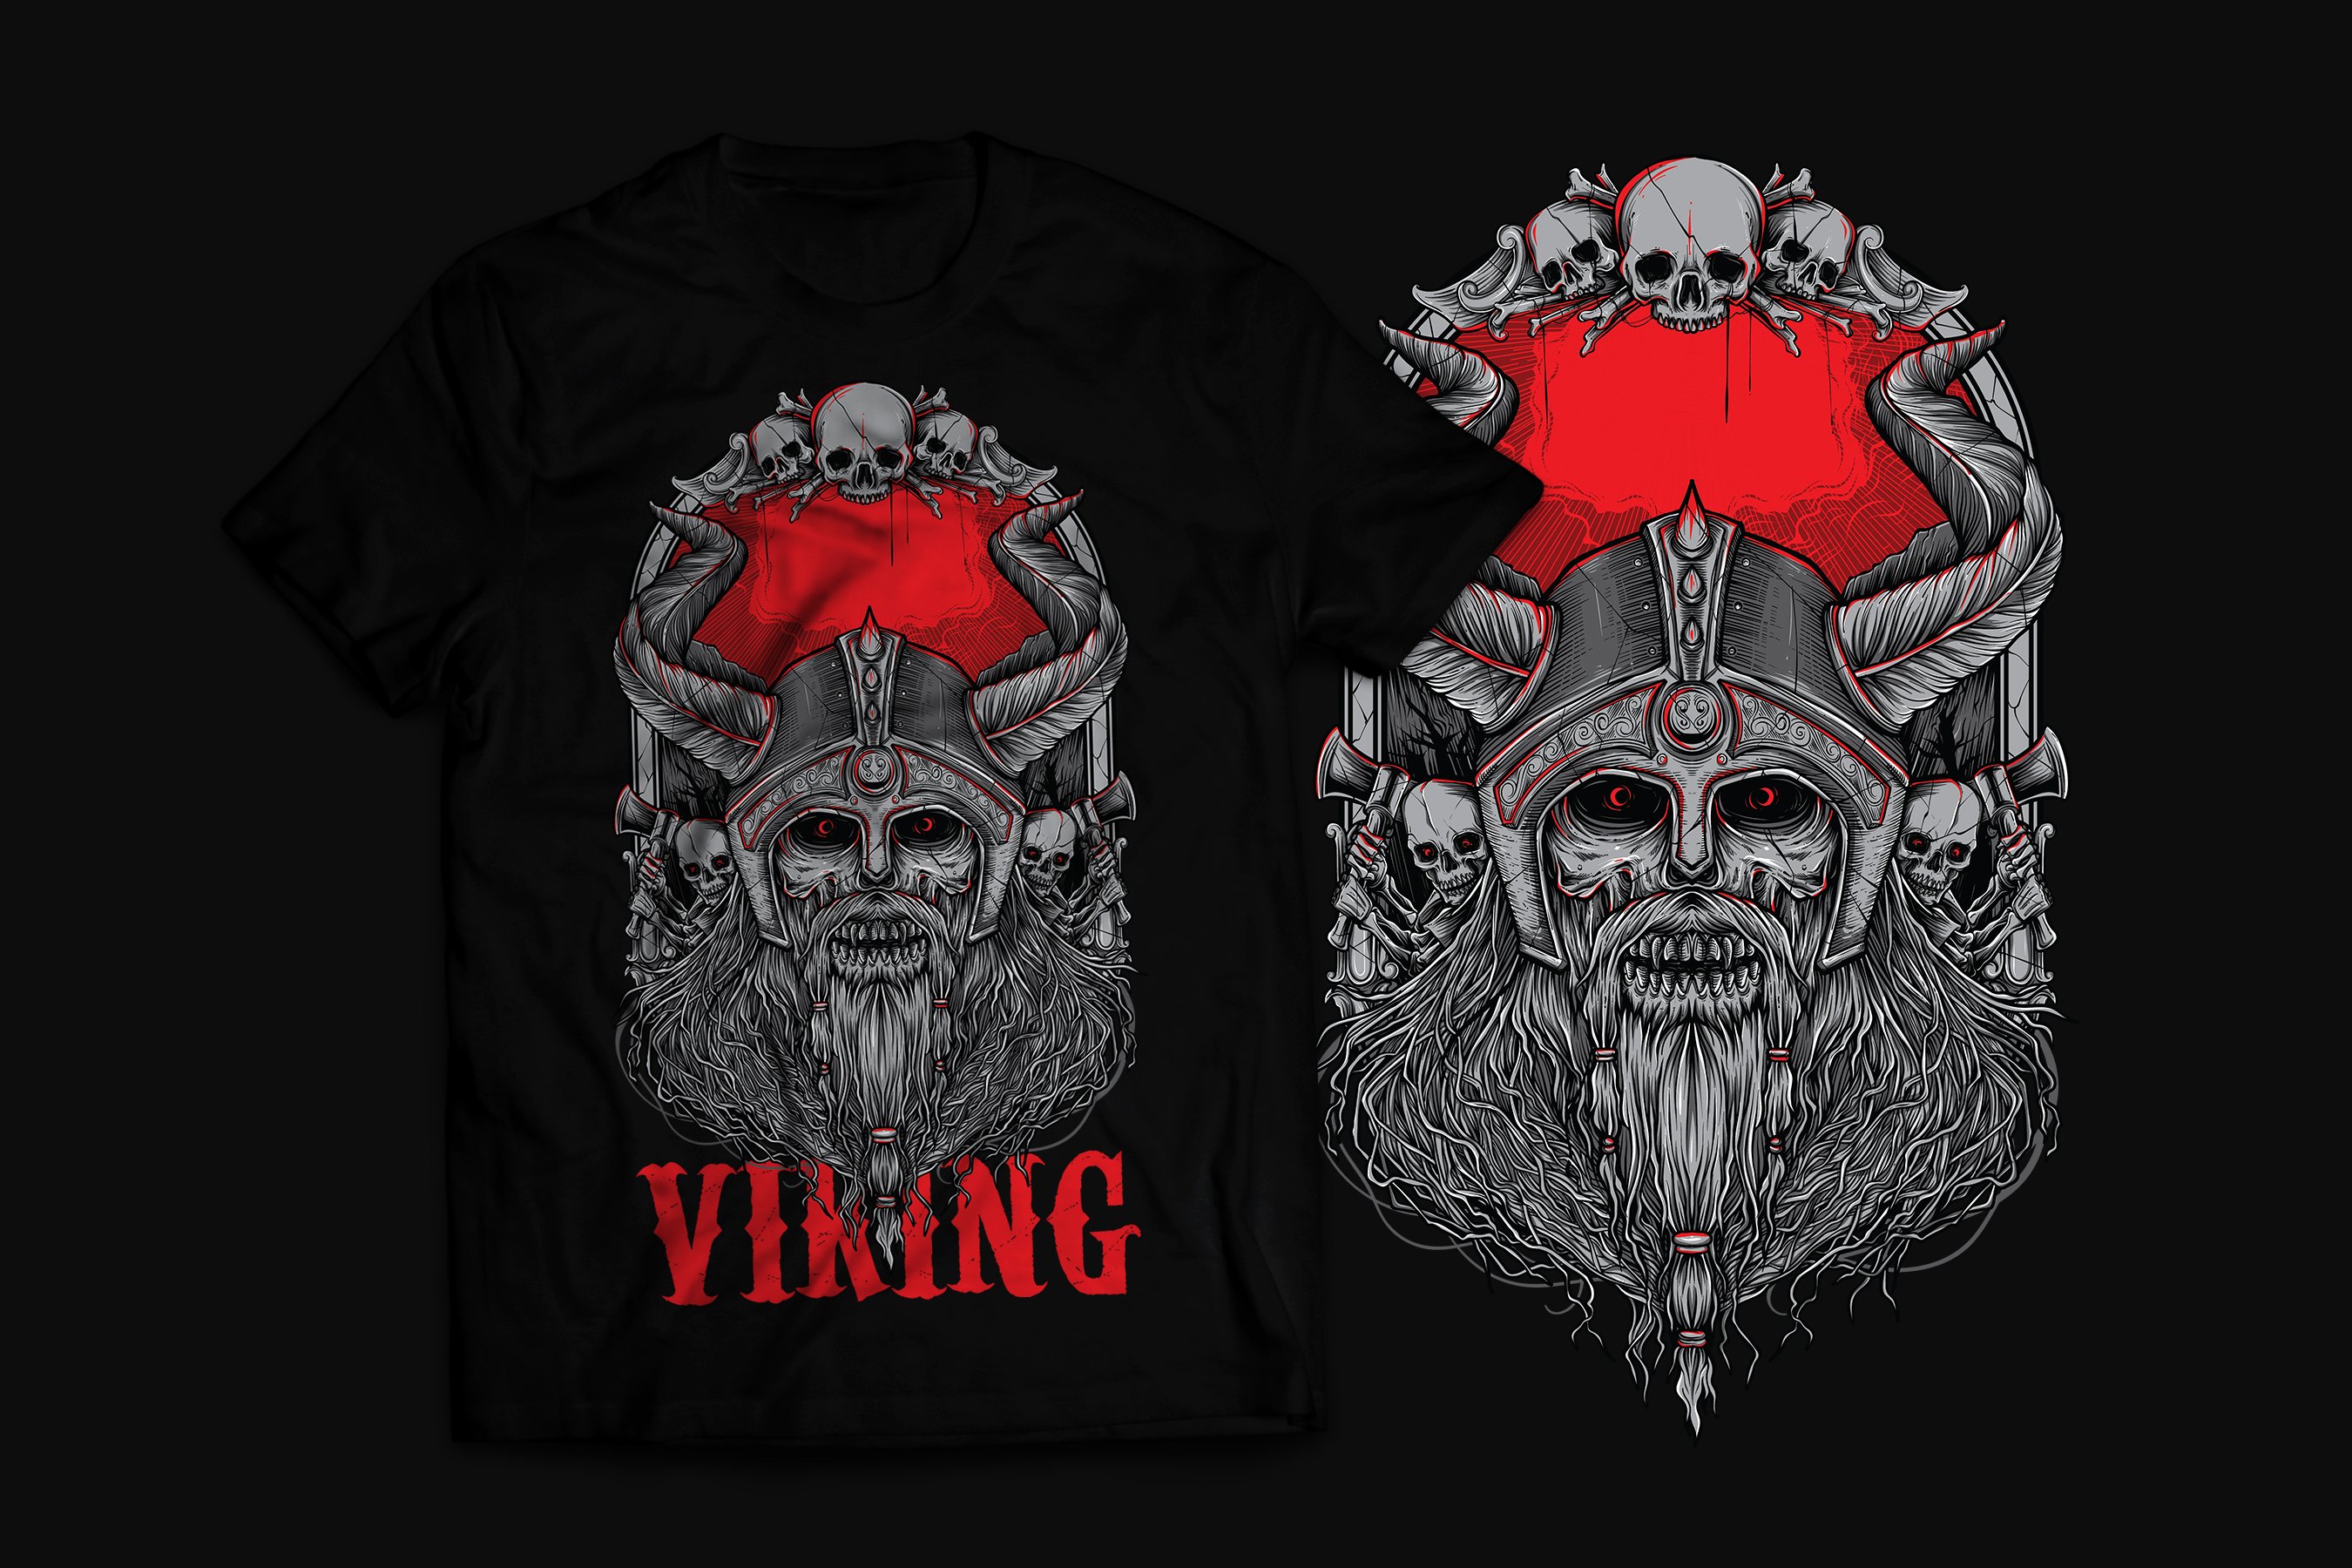 Black t-shirt with the cool viking skull.